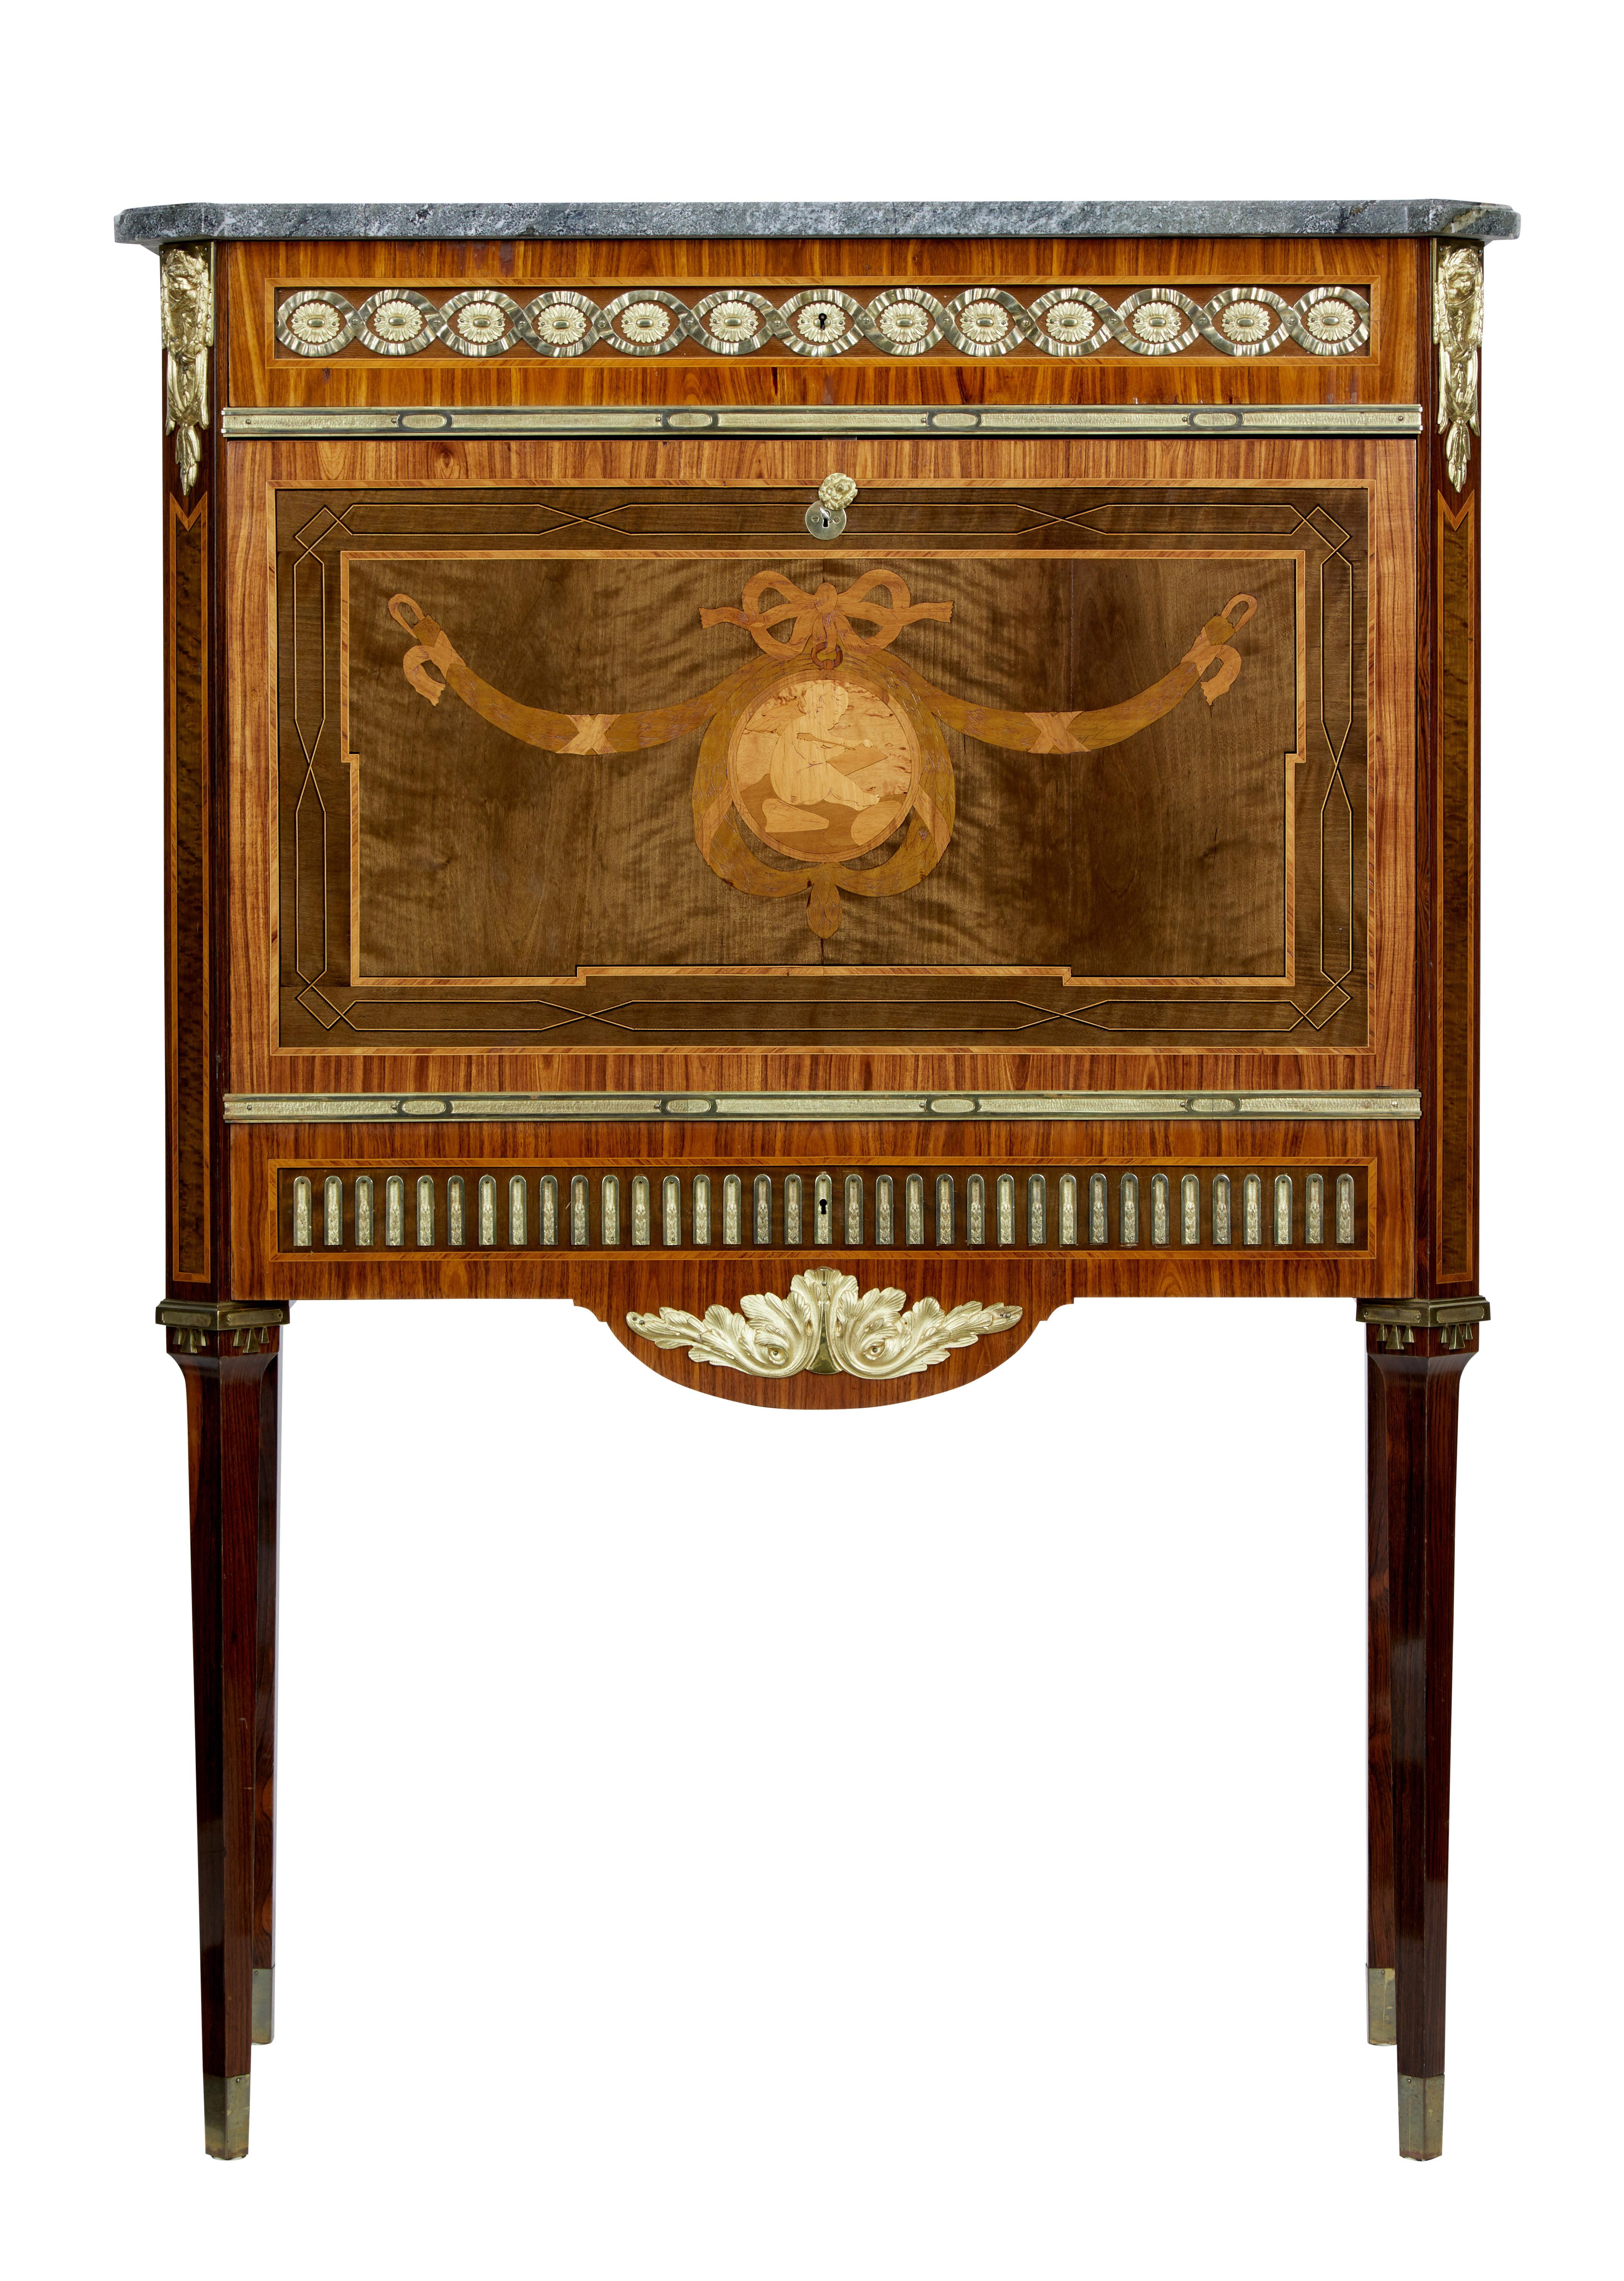 Good quality inlaid secretaire, circa 1930.

Over-sailing grey marble top with canted corners. Single drawer below the top surface cross banded and with ormolu mounts. Profusely inlaid fall drops down to a writing height of 28 3/4